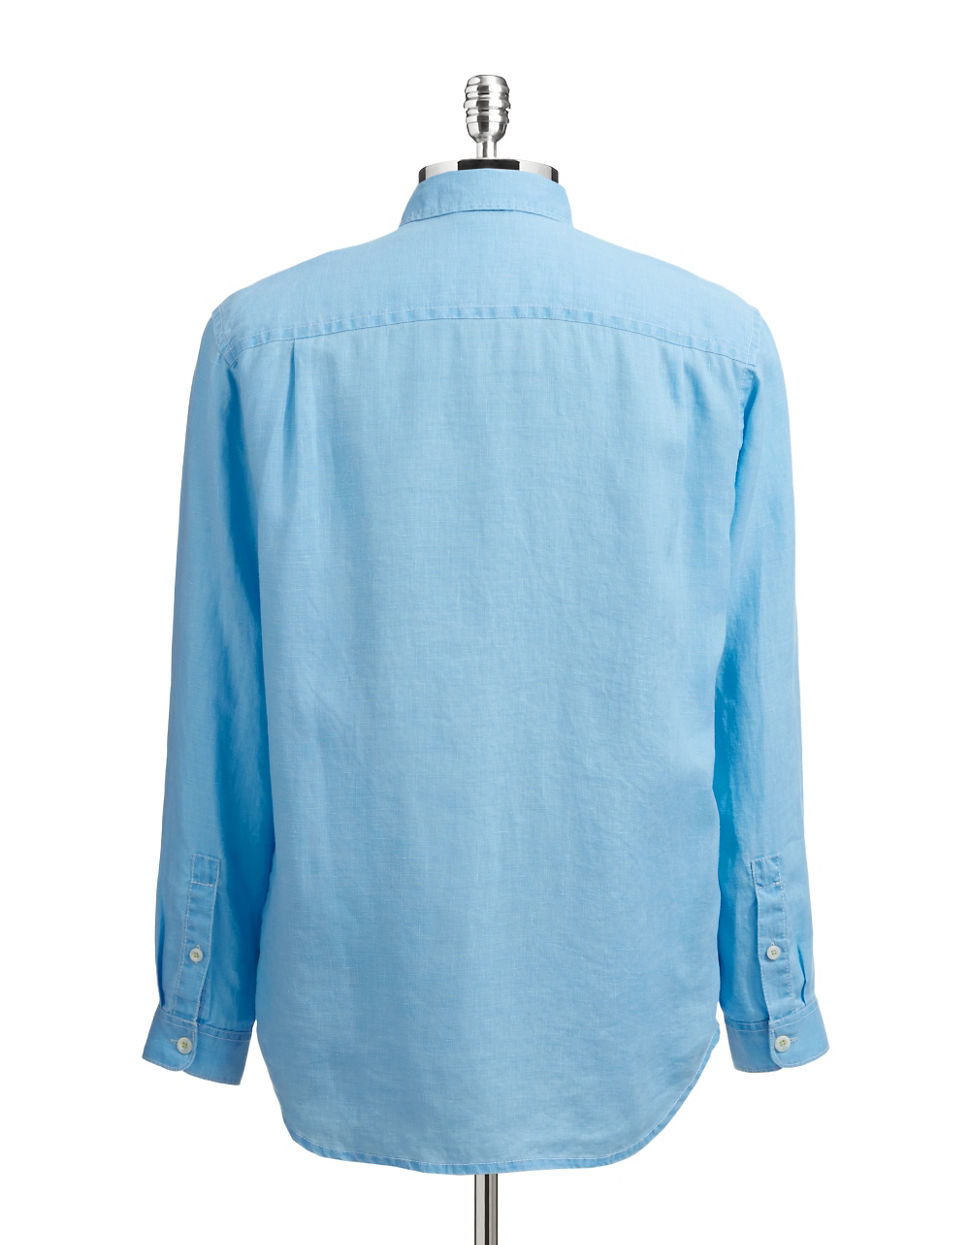 Lyst - Tommy Bahama Relax Linen Shirt in Blue for Men